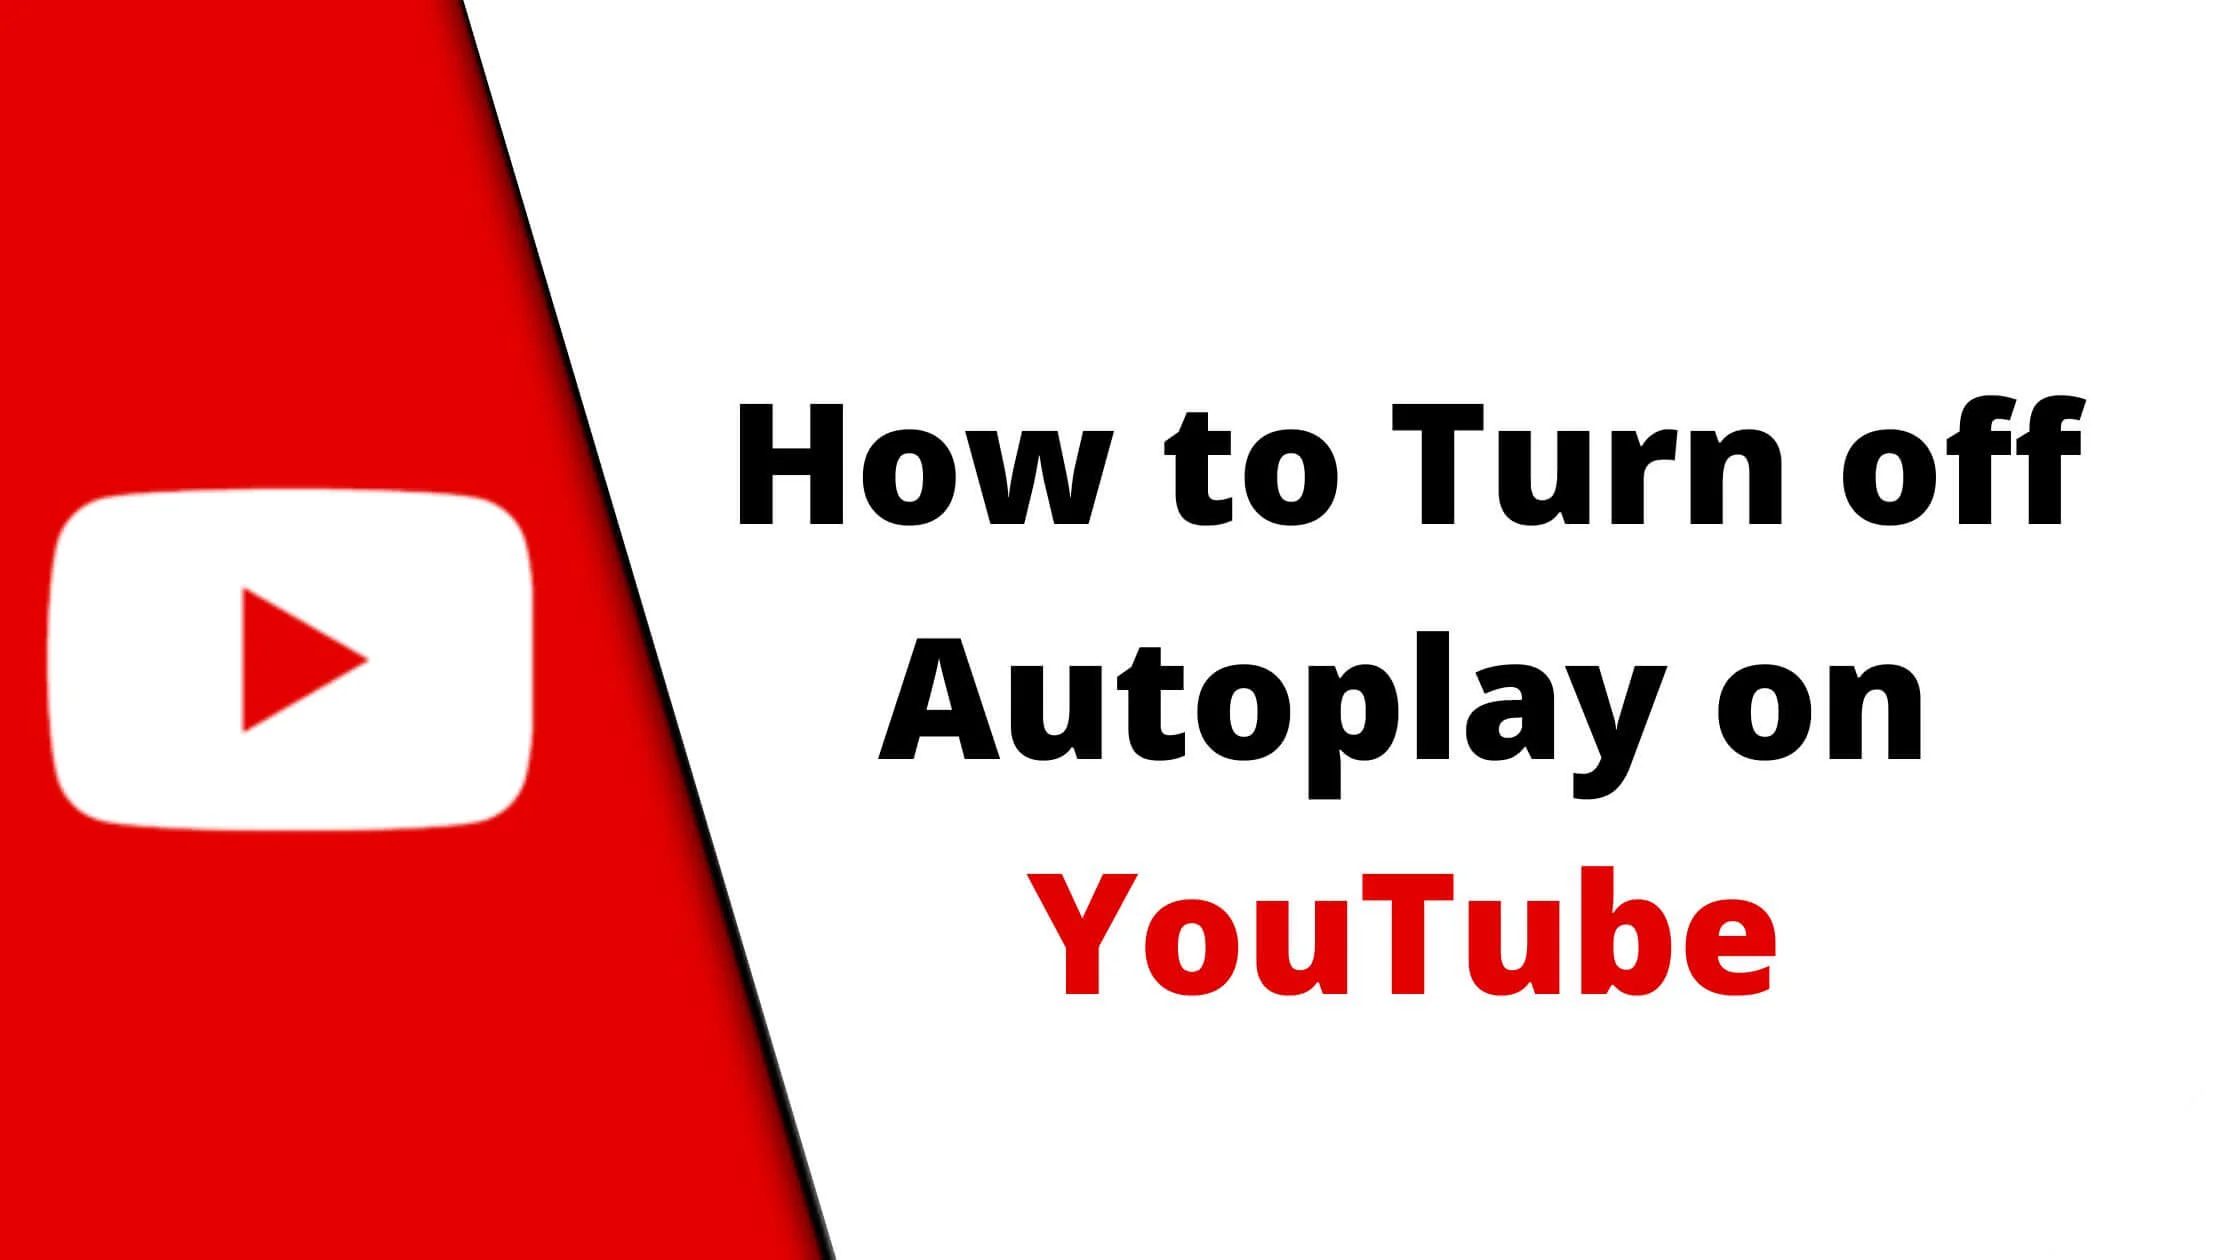 How to Turn off Autoplay on YouTube